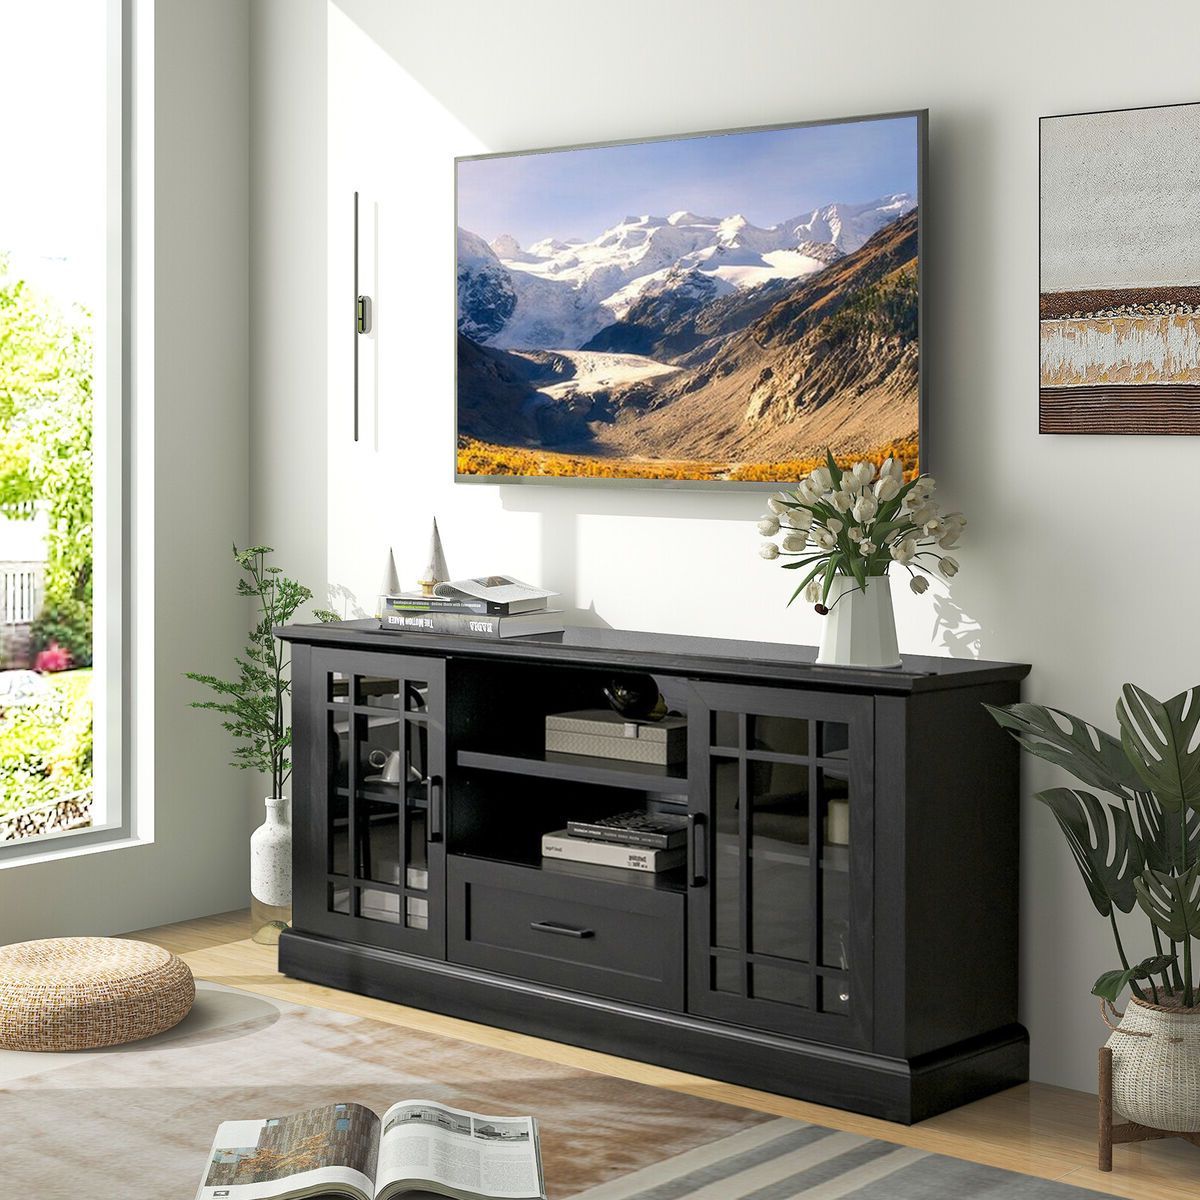 Multi Function Tv Stand W/ 2 Side Cabinets & Large Drawer & 2 Open Shelves  Black | Ebay Within Tv Stands With 2 Doors And 2 Open Shelves (View 7 of 20)